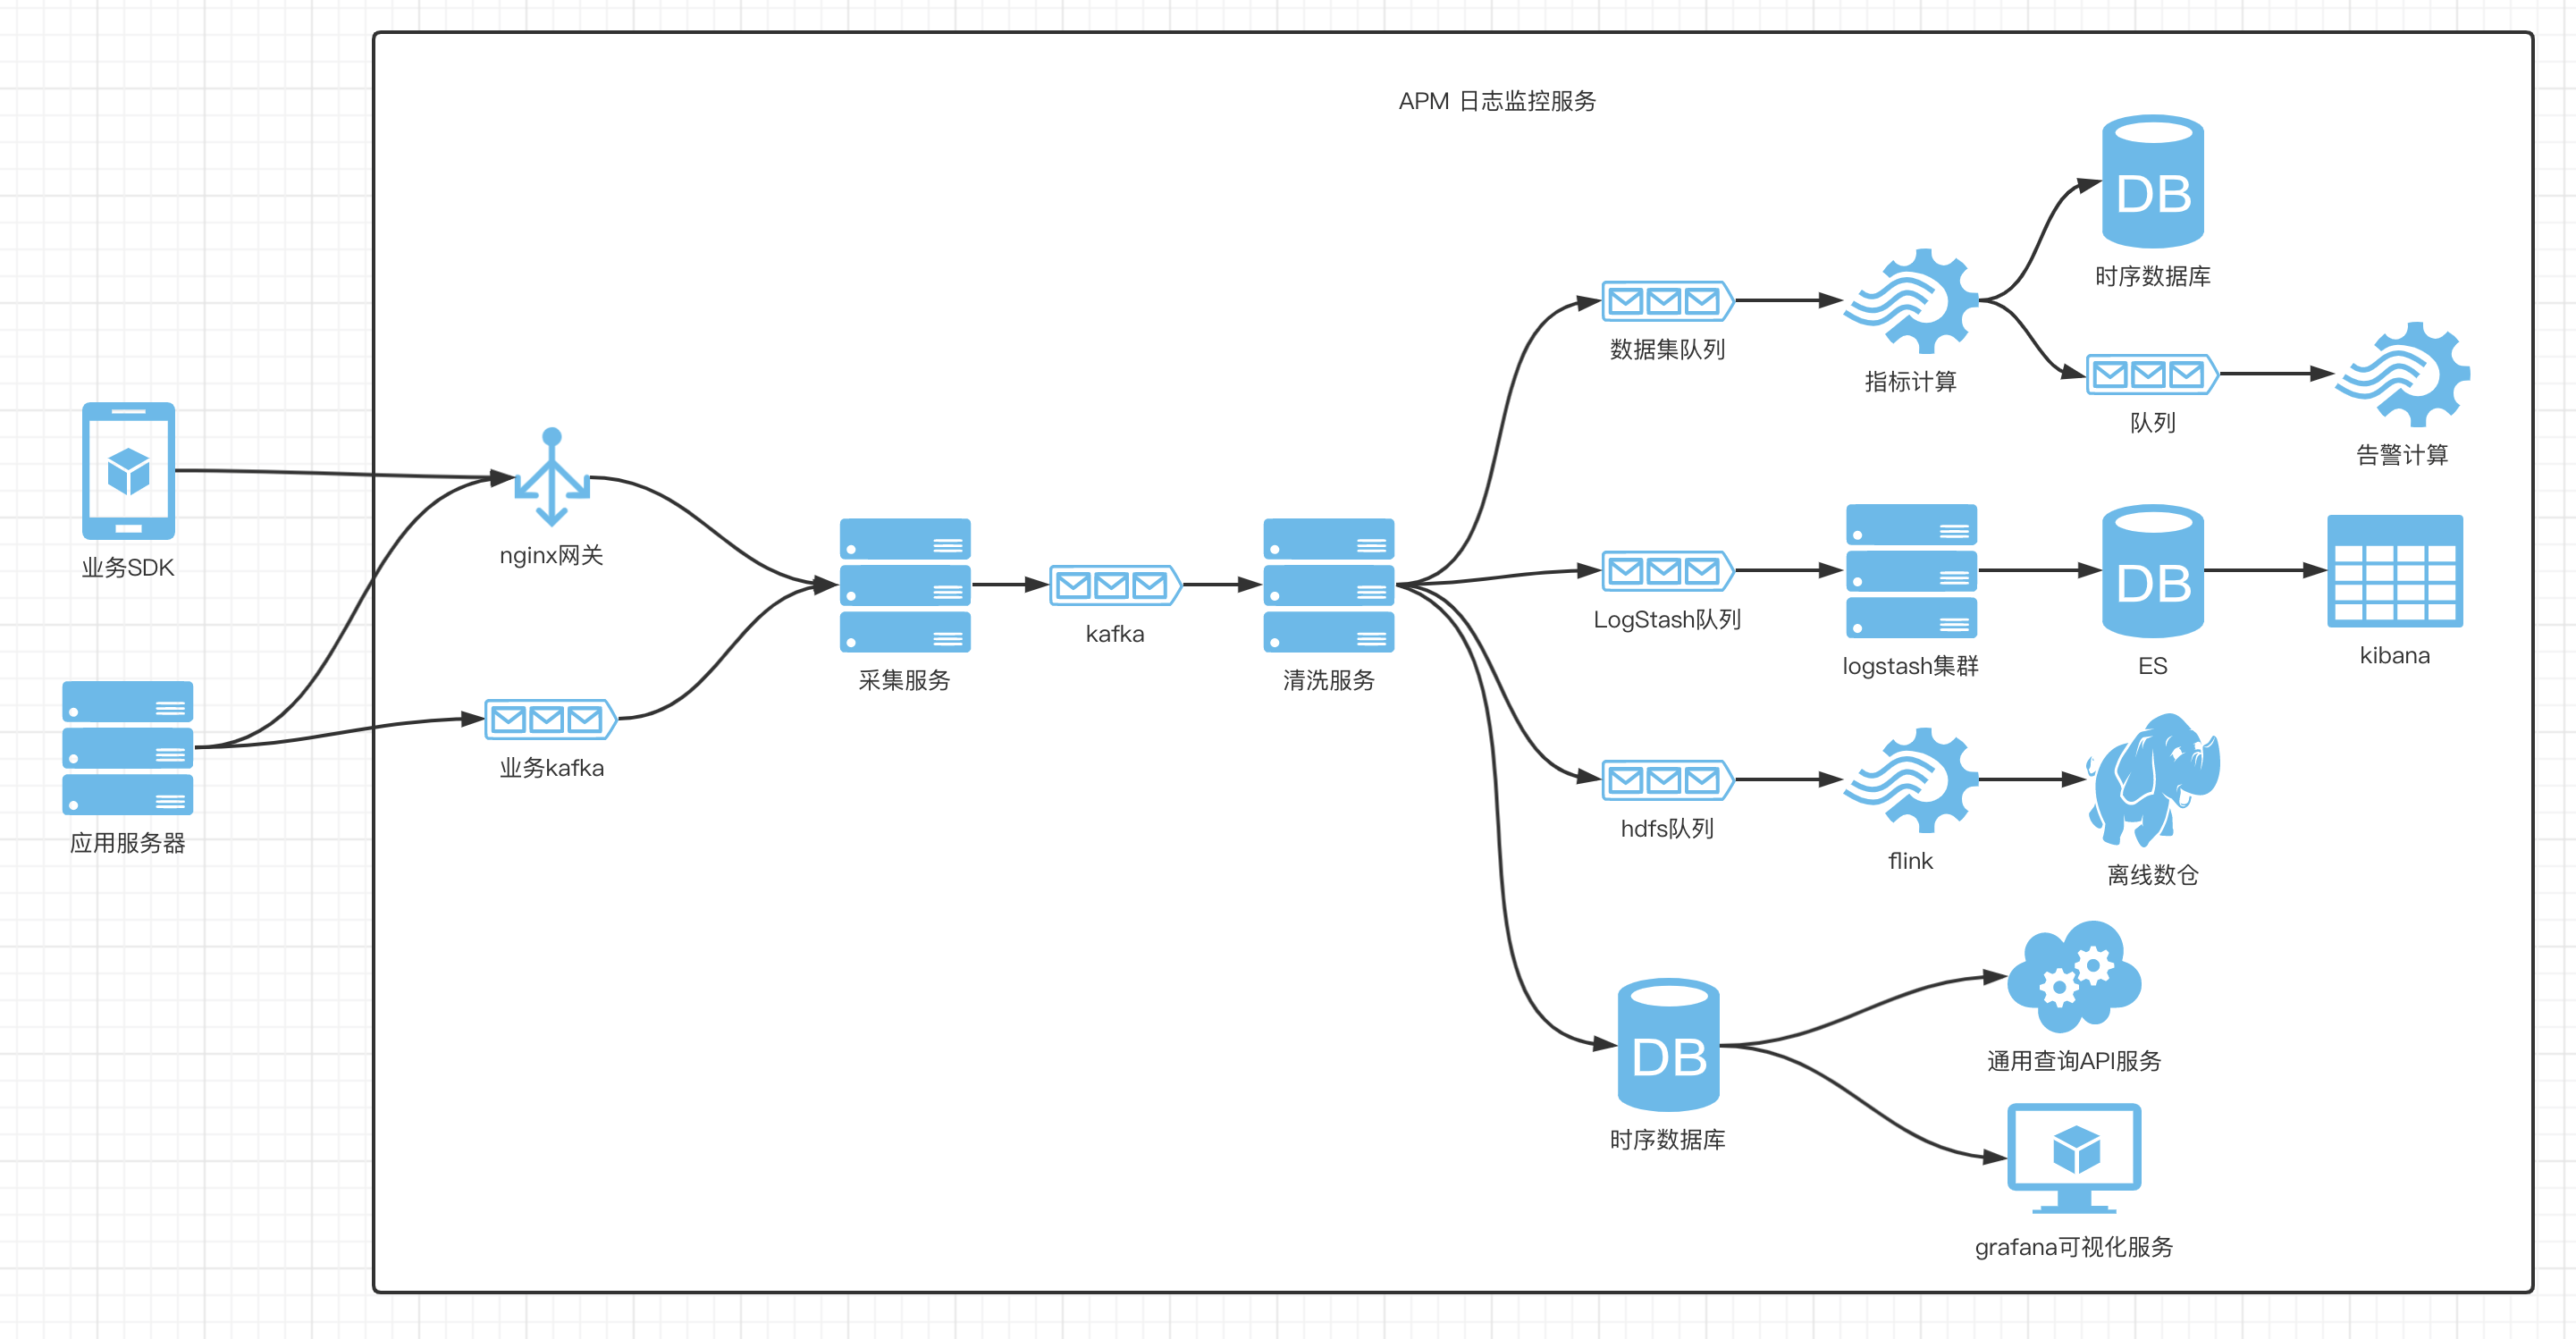  Overall architecture of Netease cloud information collection monitoring platform